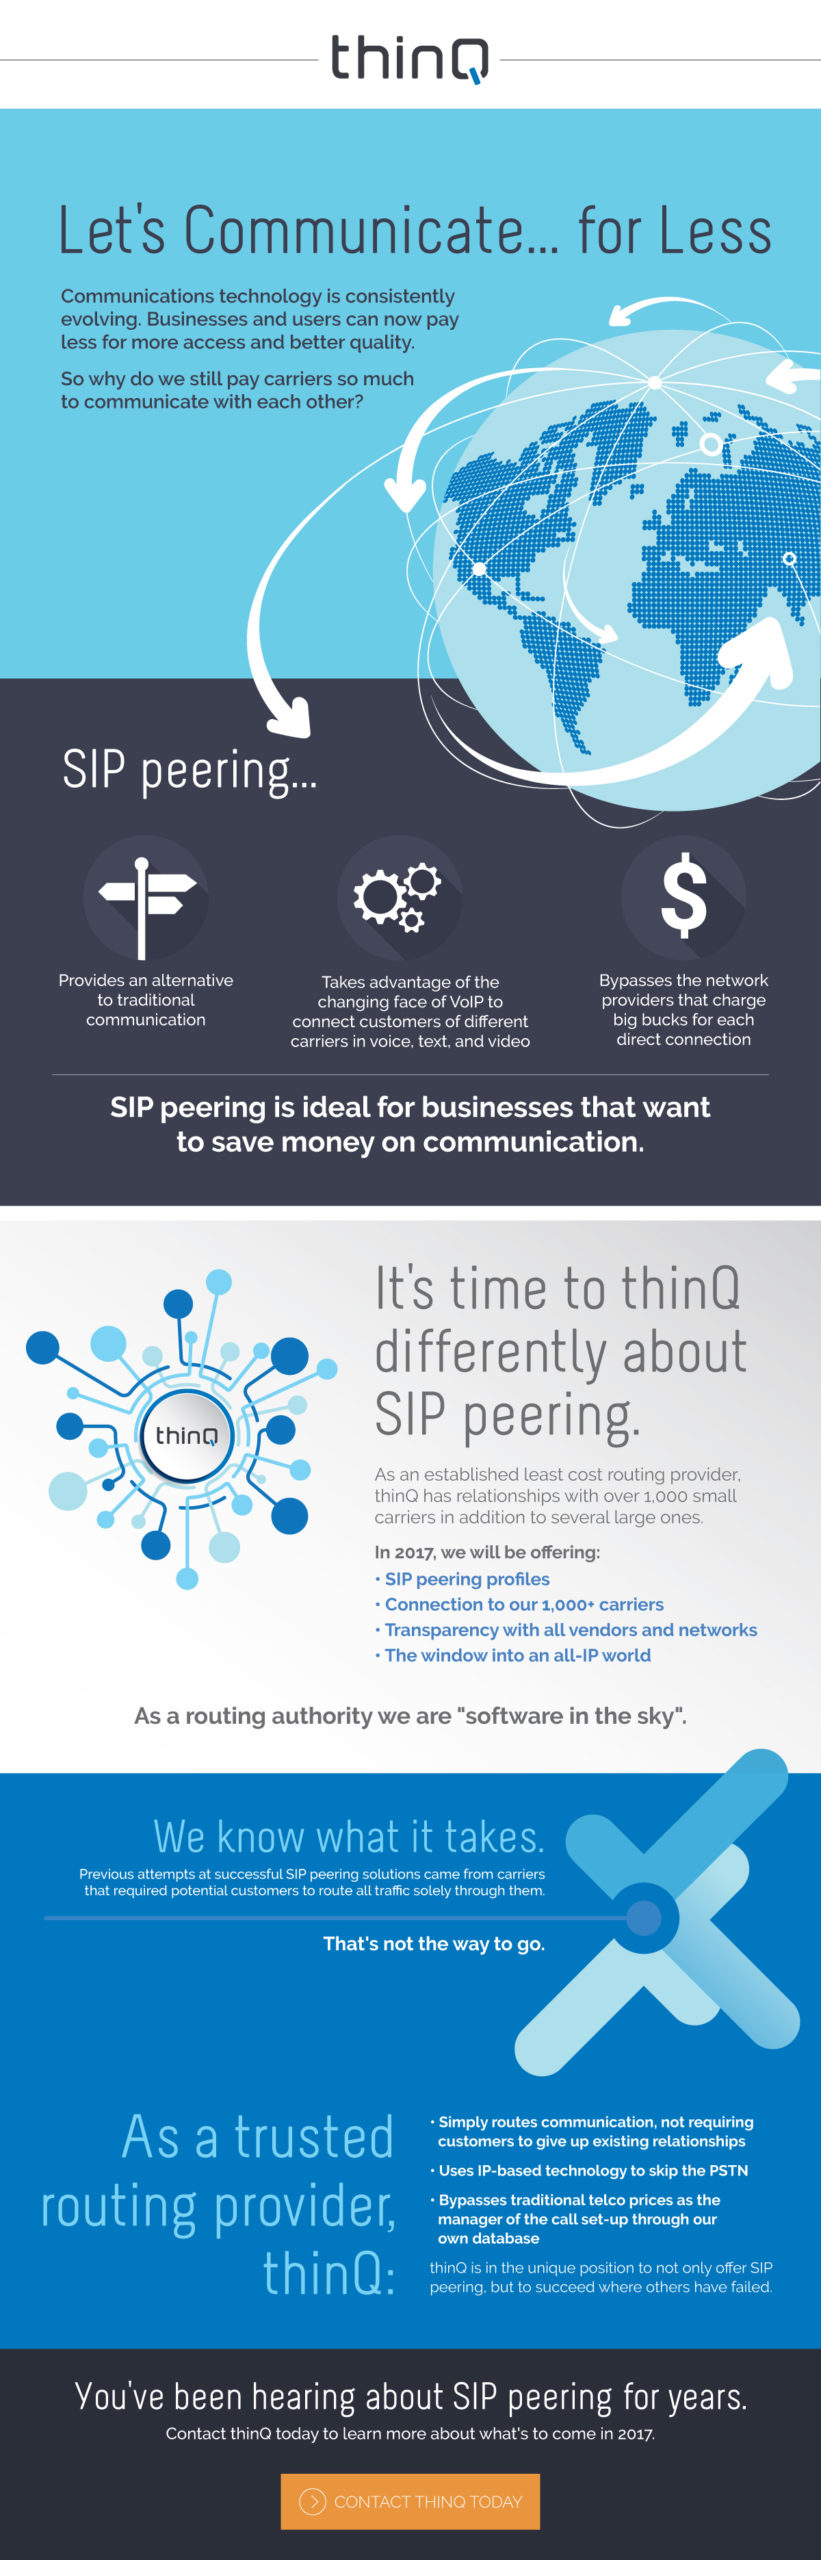 thinQ SIP Peering Infographic